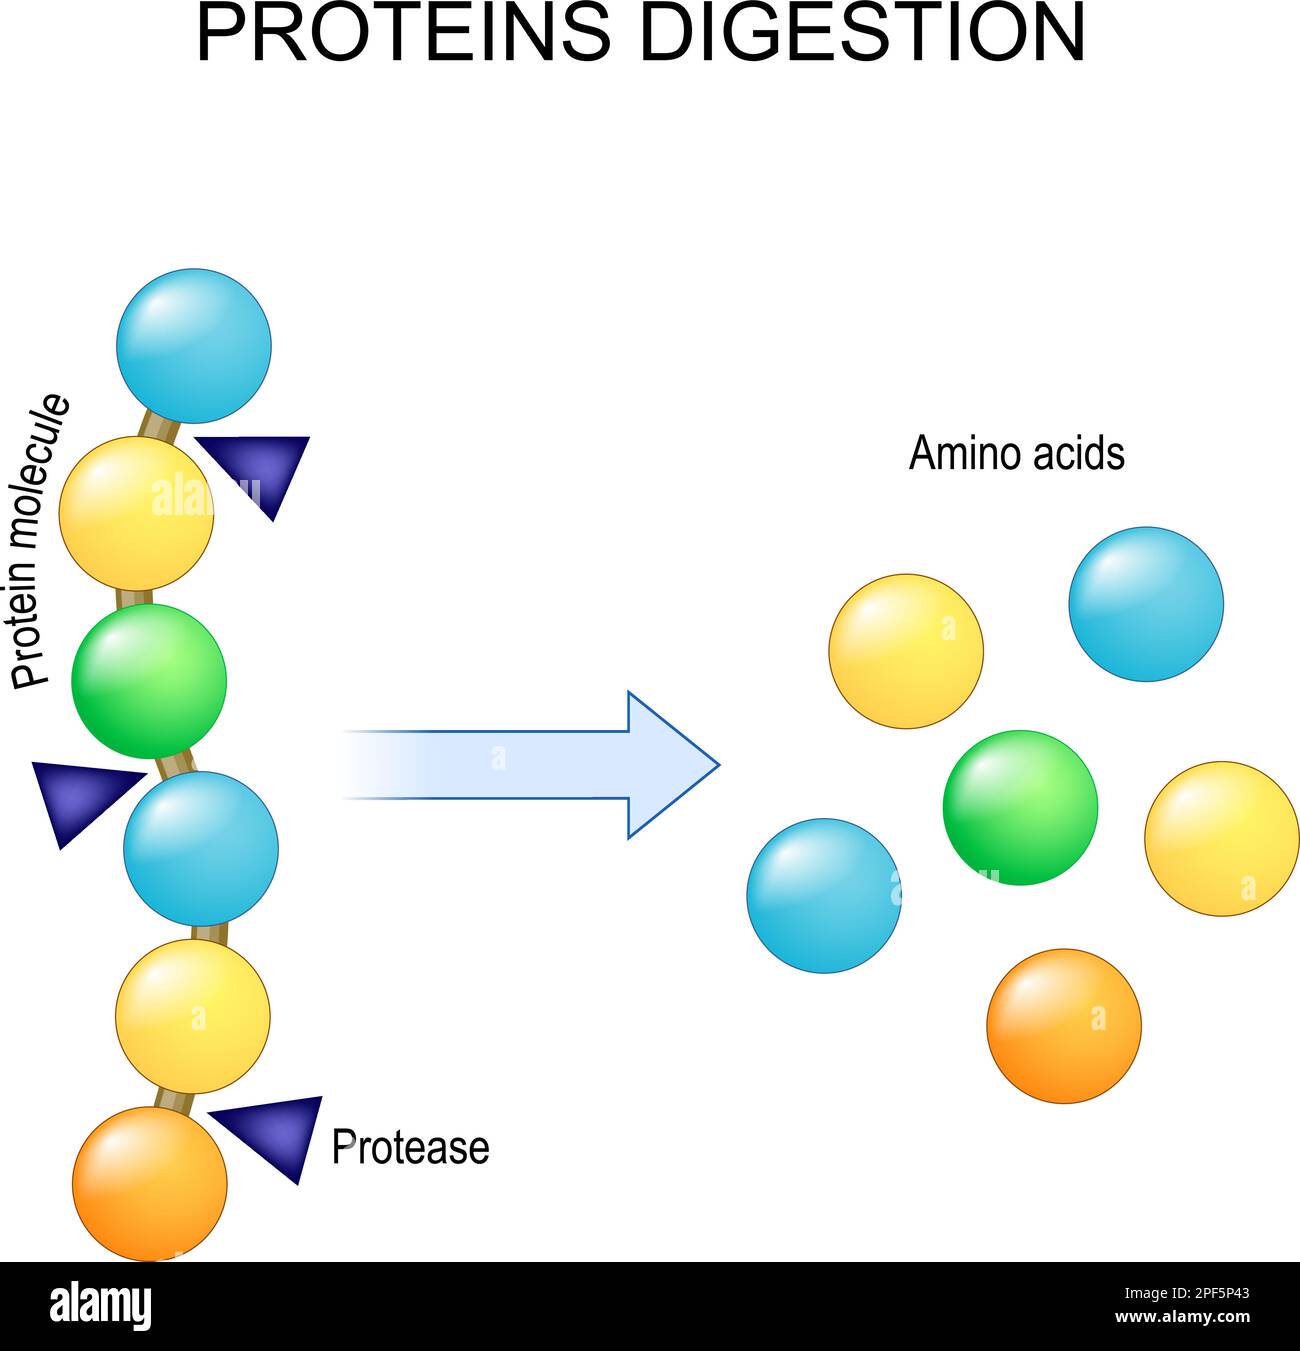 Protein digestion. Enzymes proteases are digestion breaks the protein into single amino acids, which are absorbed into the blood. Vector illustration Stock Vector